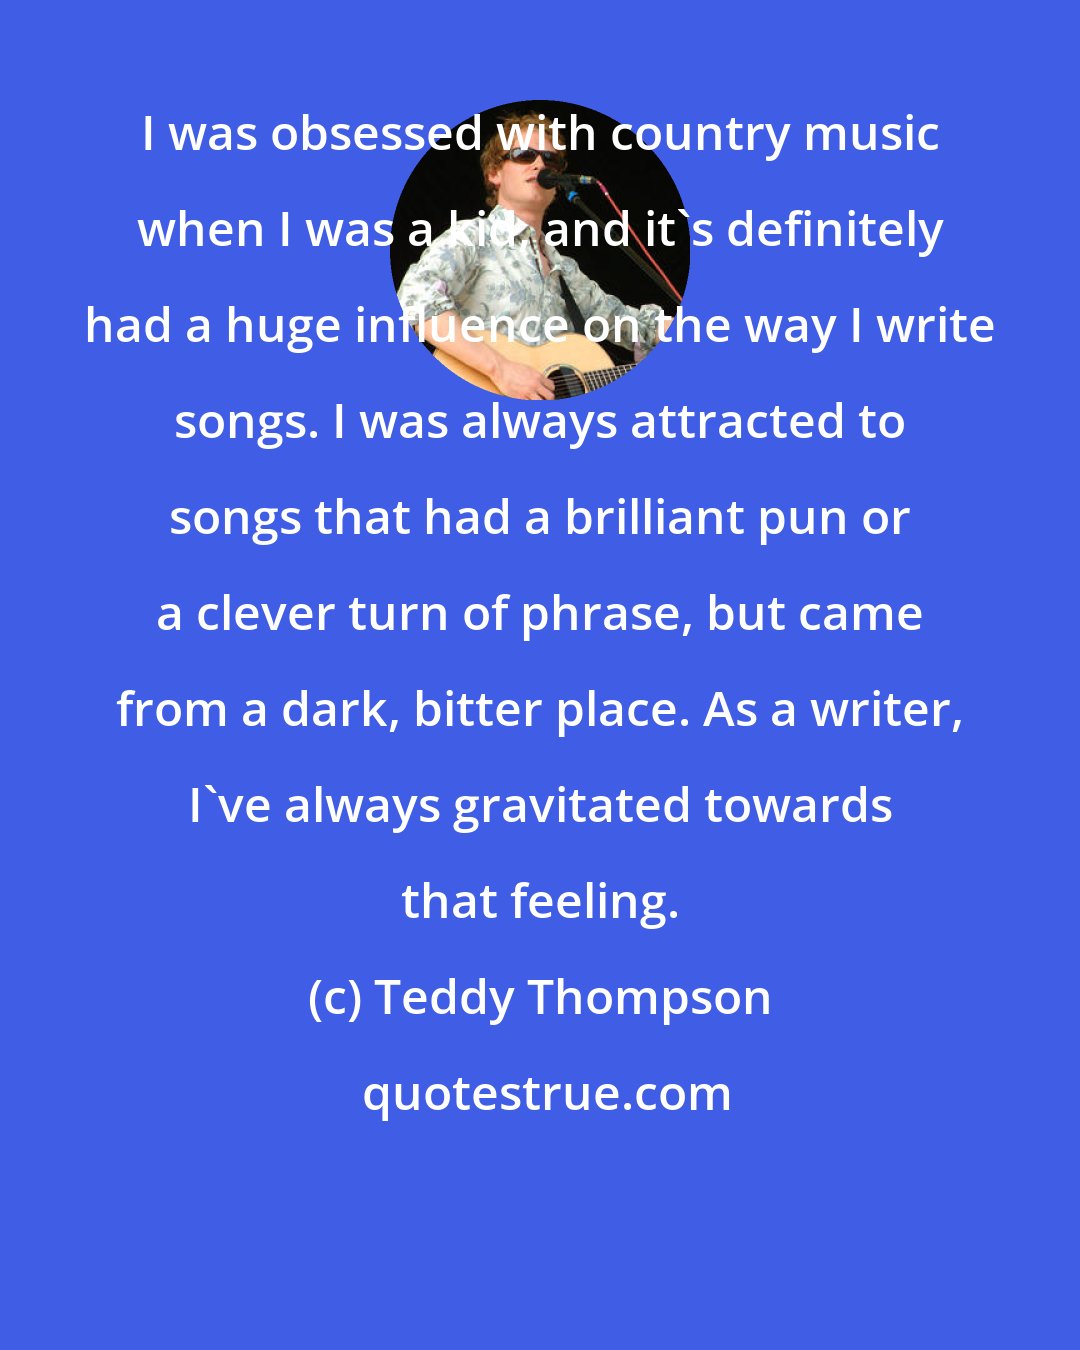 Teddy Thompson: I was obsessed with country music when I was a kid, and it's definitely had a huge influence on the way I write songs. I was always attracted to songs that had a brilliant pun or a clever turn of phrase, but came from a dark, bitter place. As a writer, I've always gravitated towards that feeling.